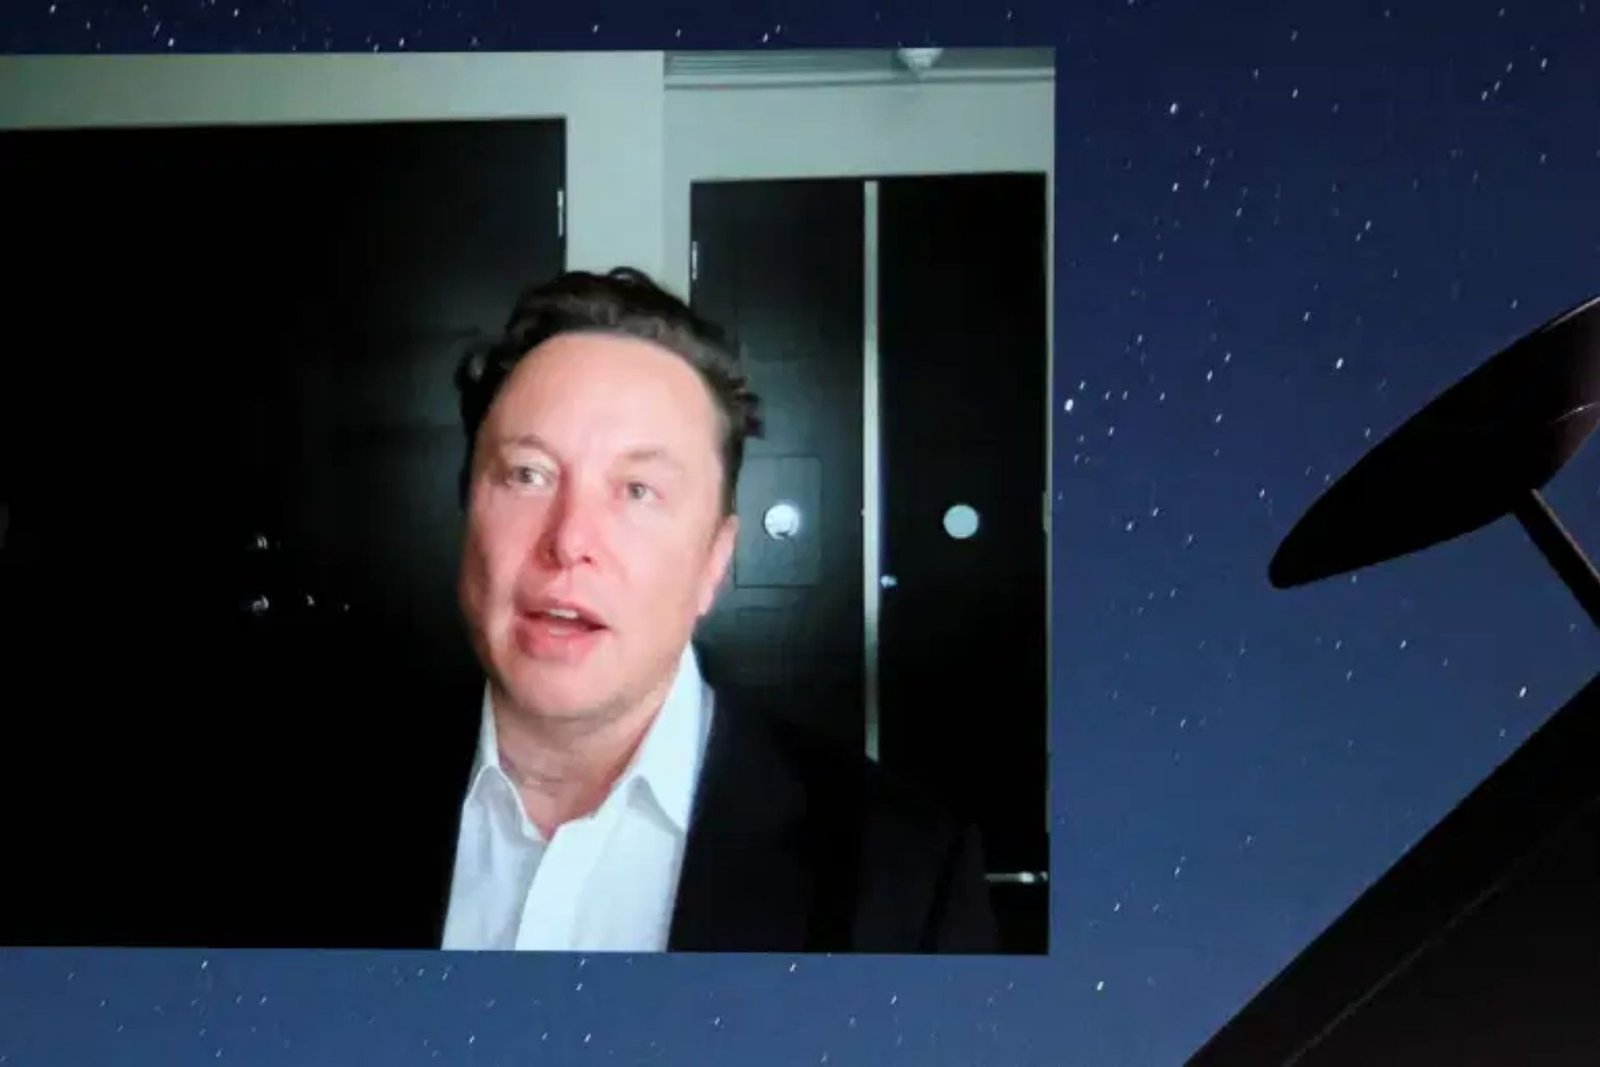 Musk Claims That SpaceX Is Prepared To Spend $30B On Starlink.